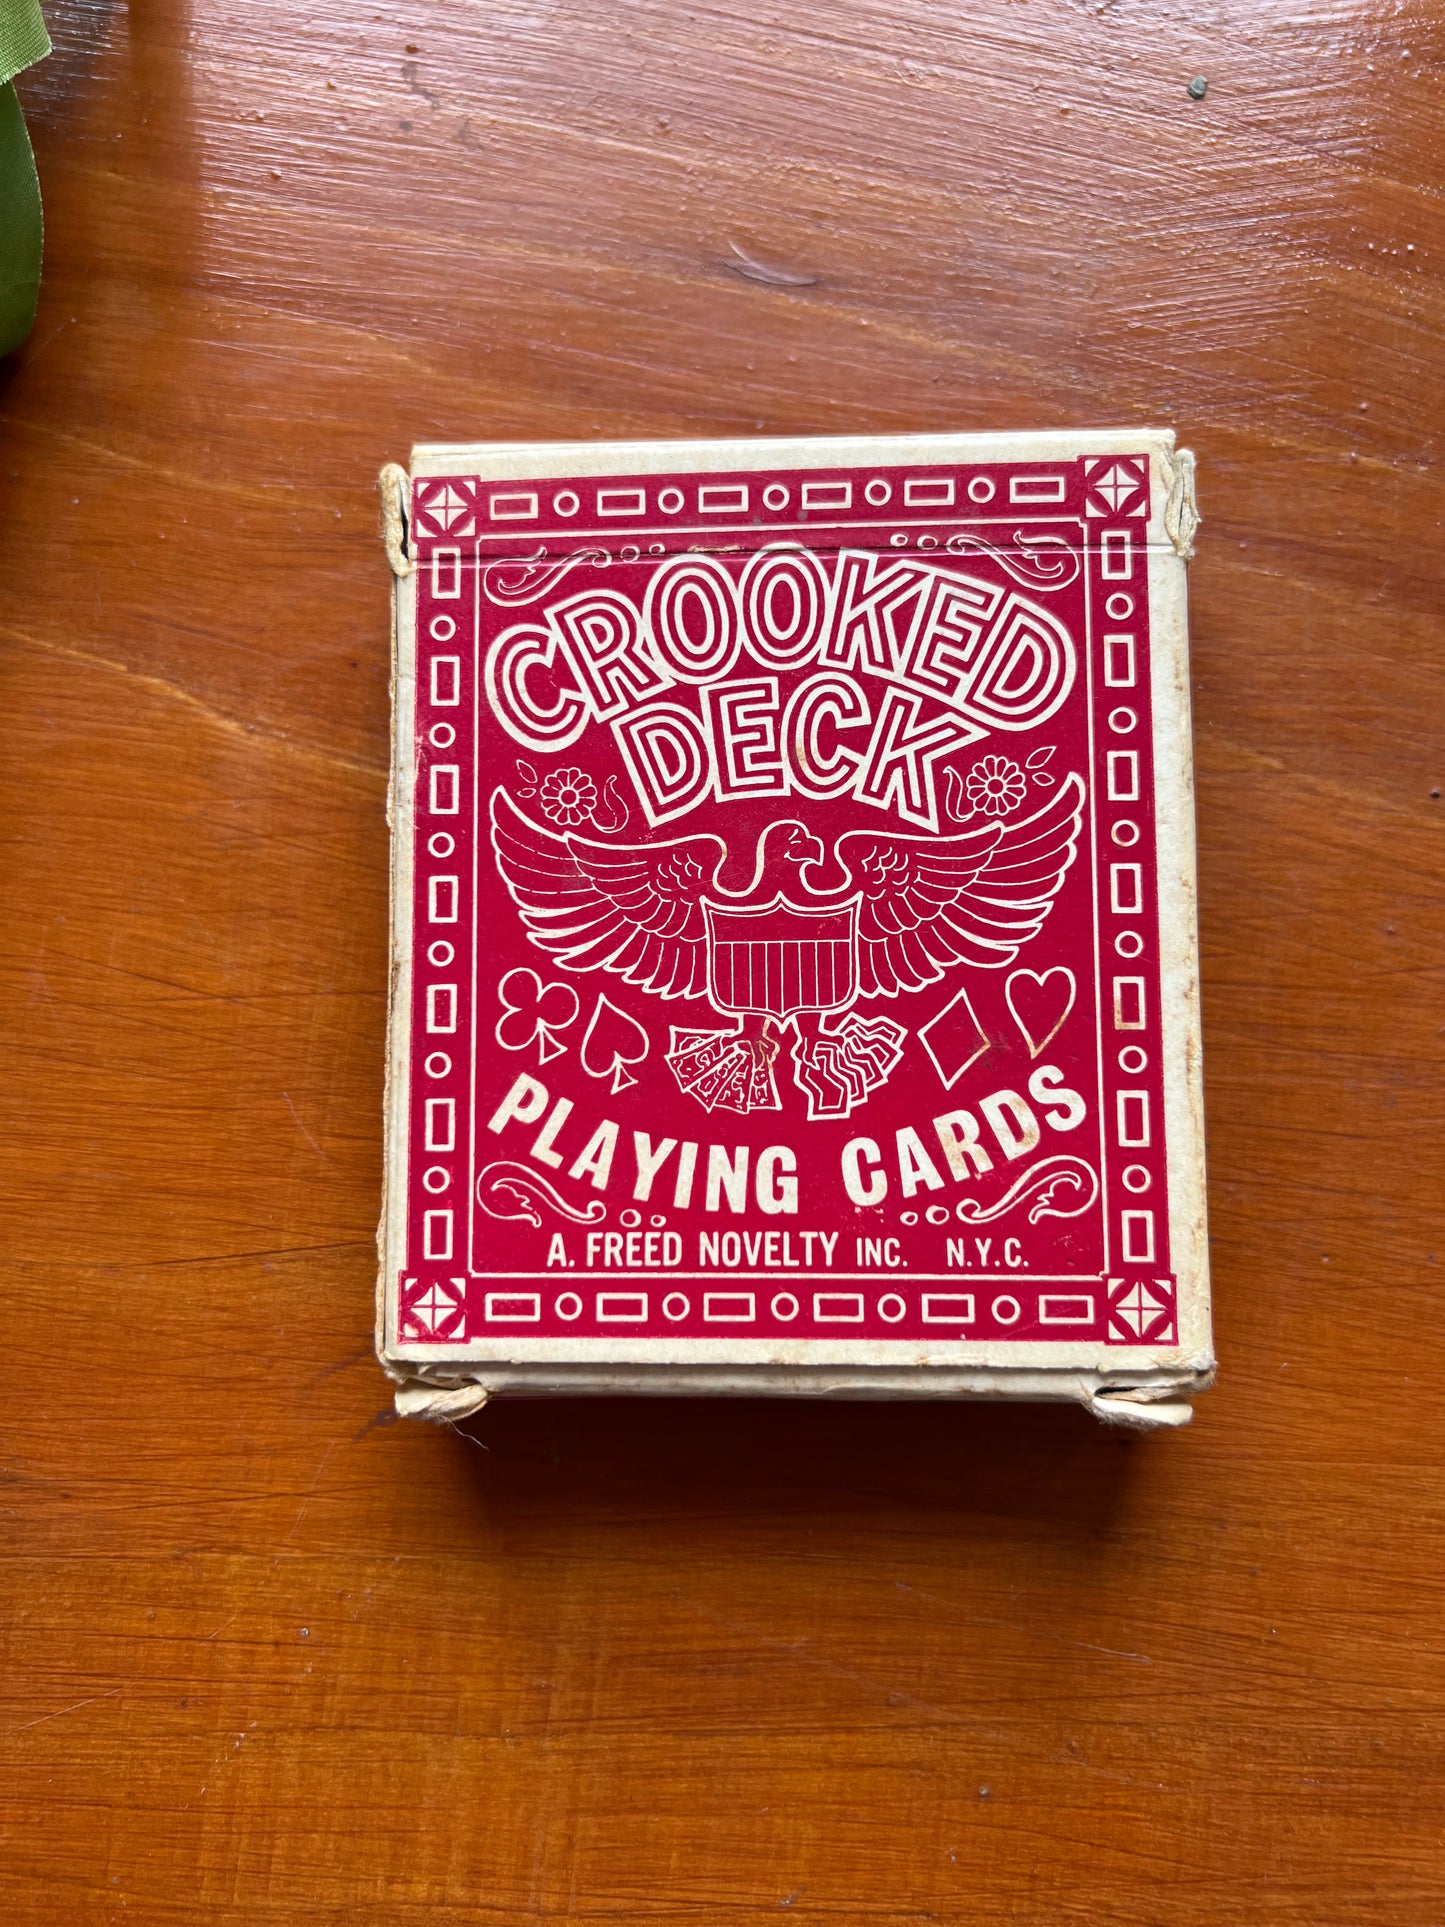 Vintage Crooked Deck Pack of Playing Cards from A. Freed Novelty